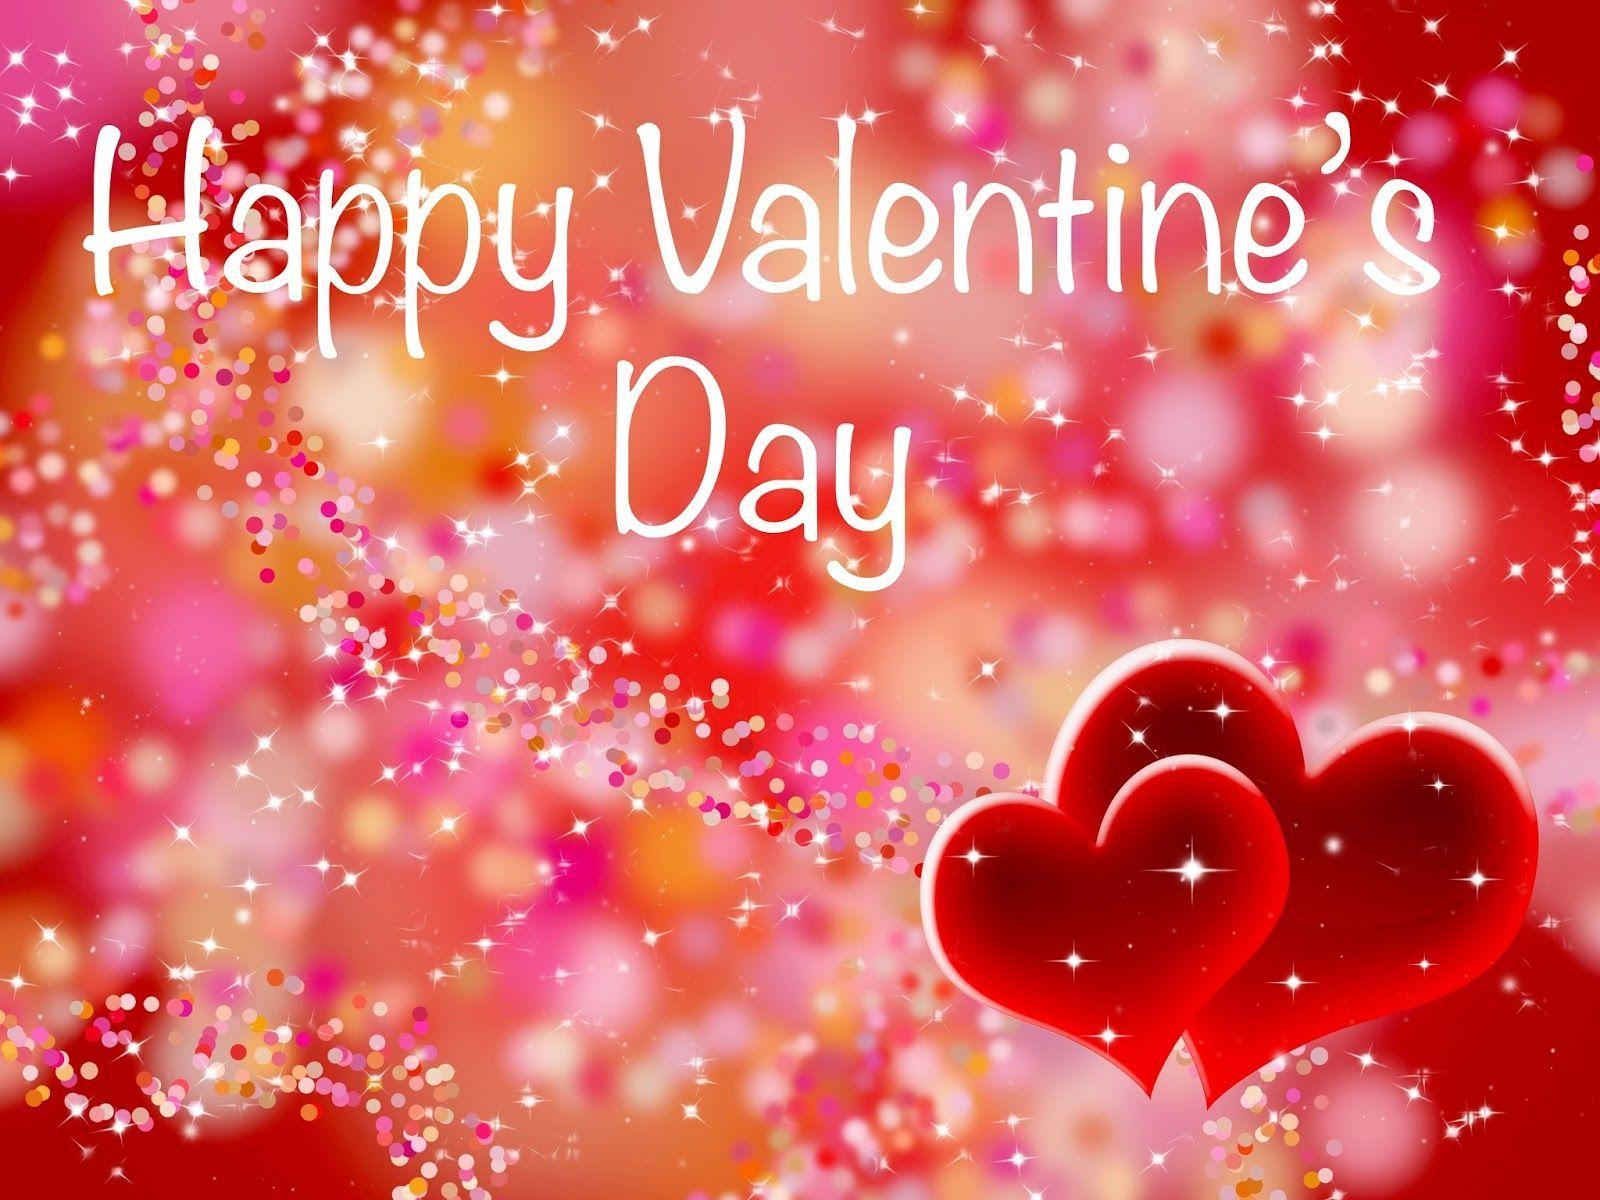 Happy Valentines day image picture, wallpaper, Photo